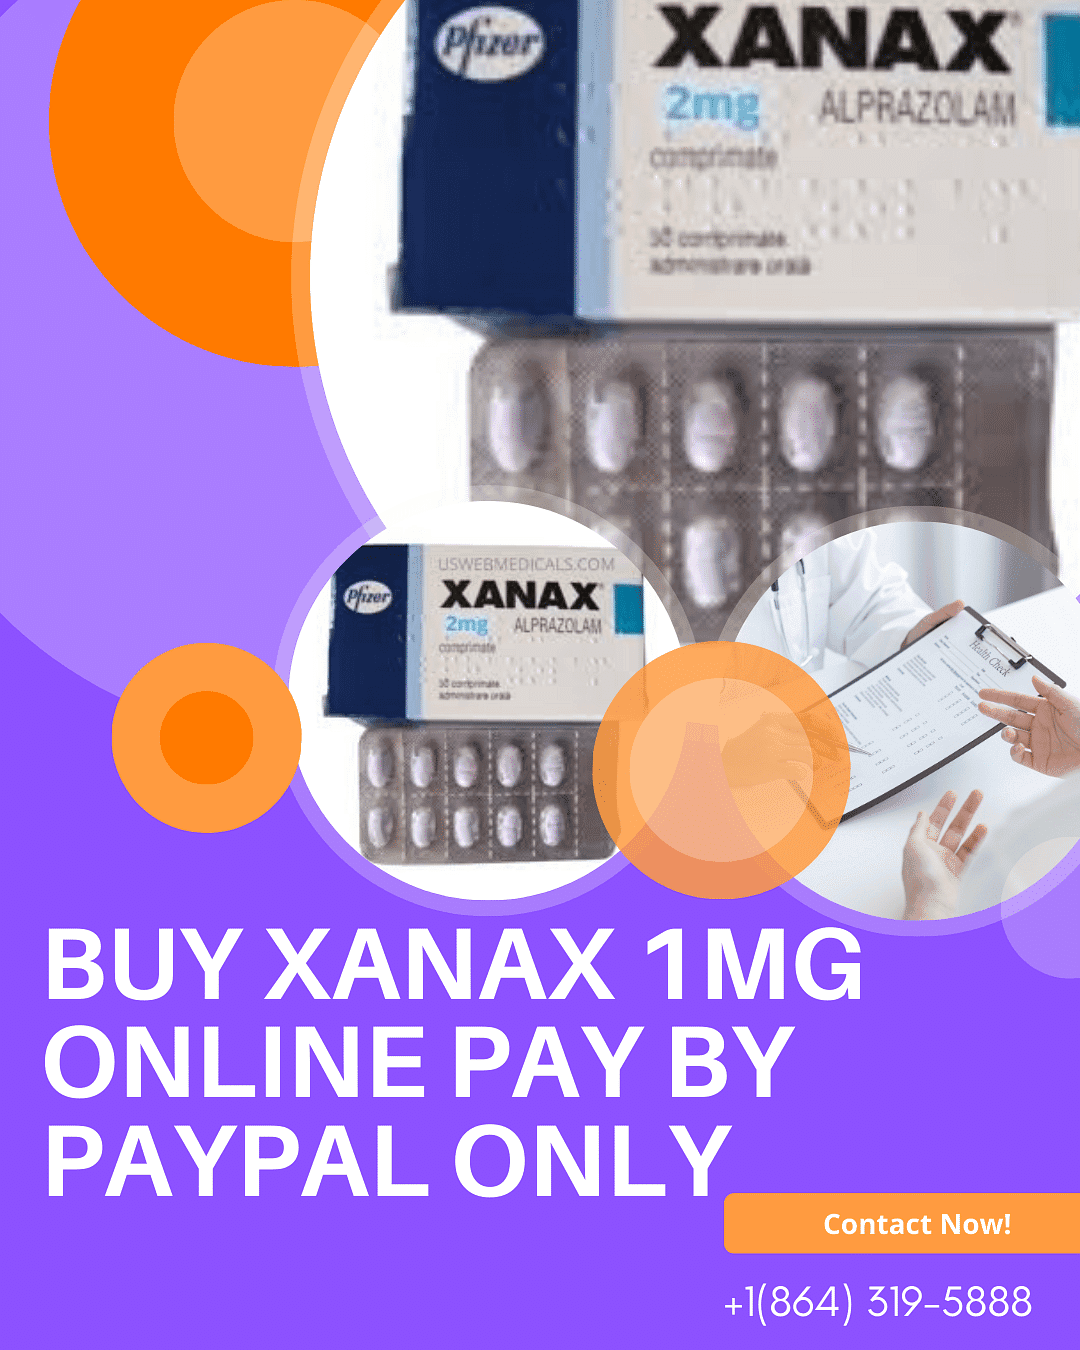 Order Xanax-2mg Online Without Prescription cover